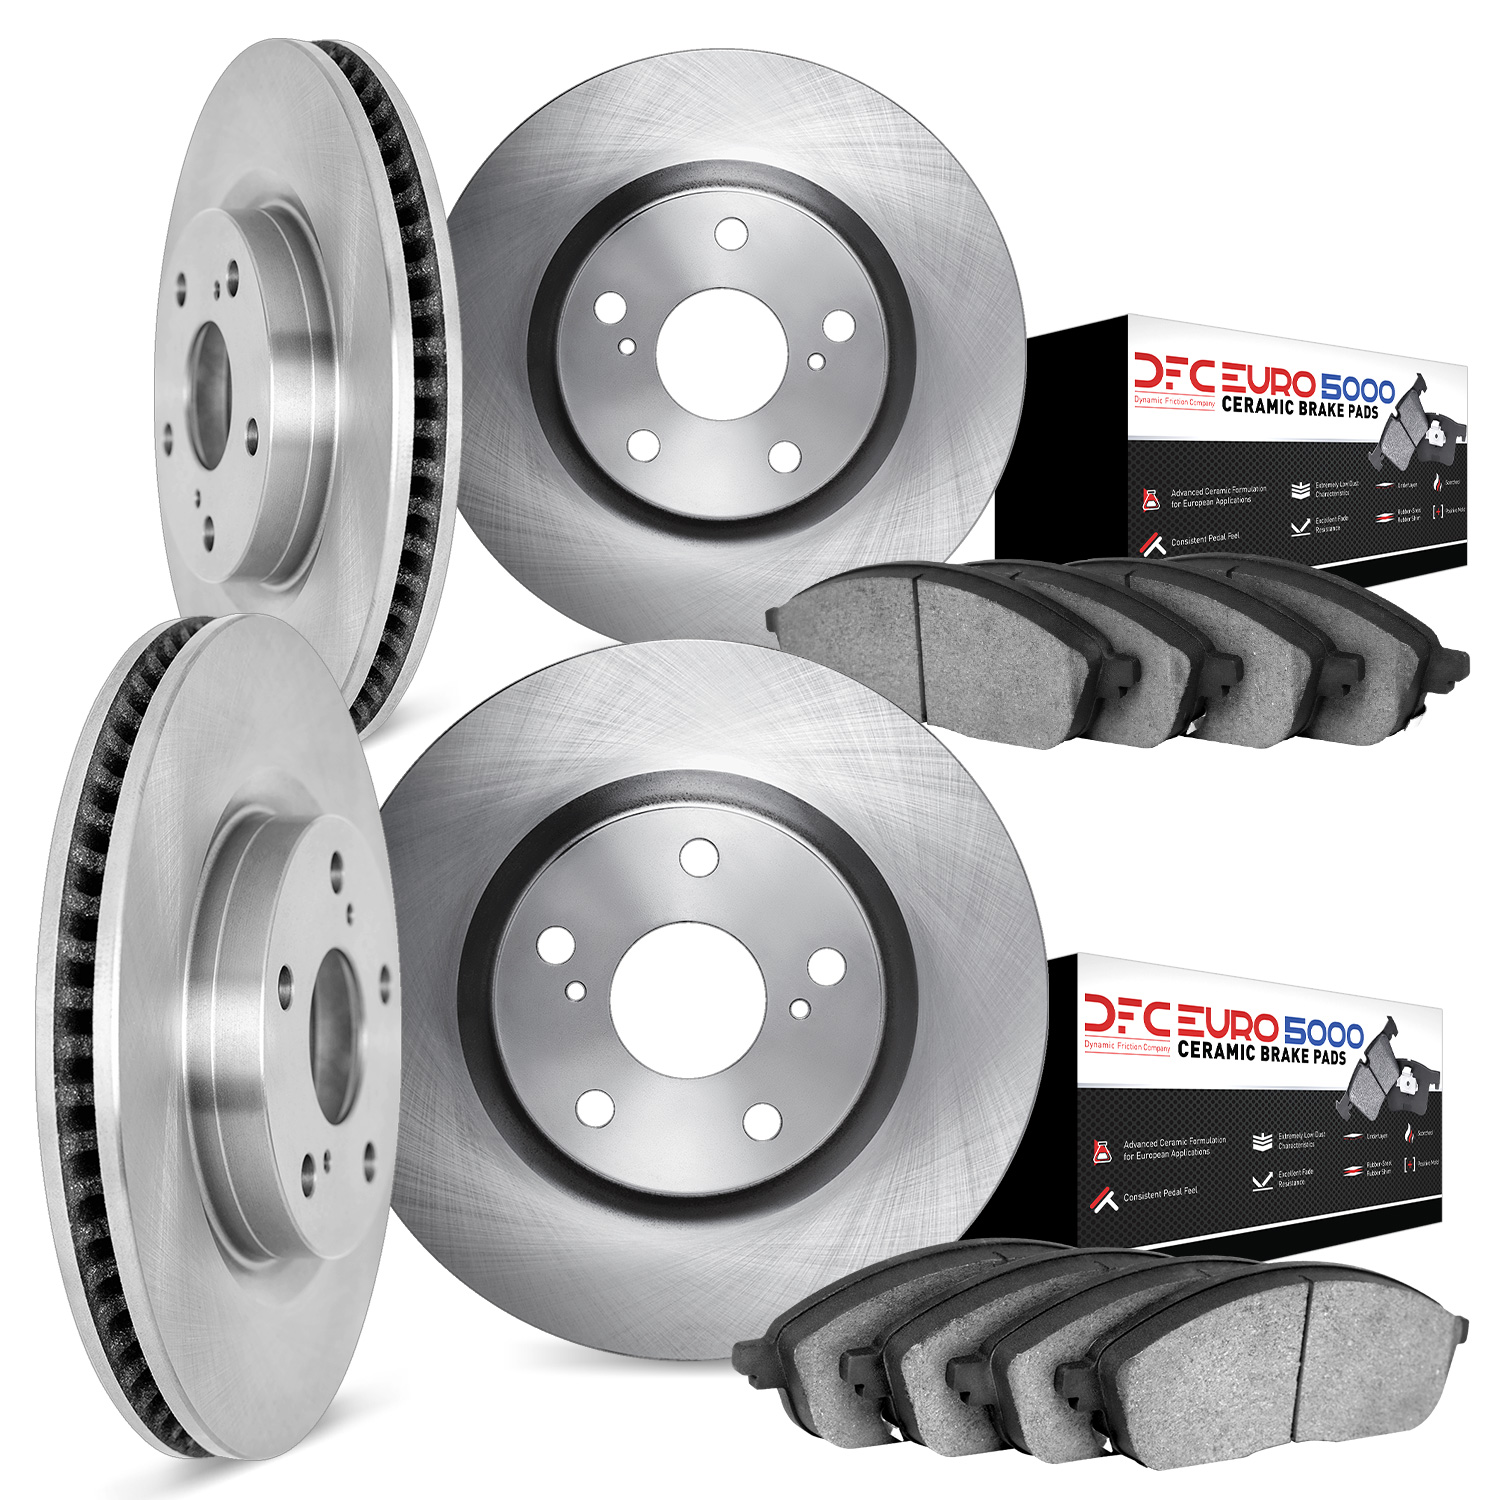 6604-31014 Brake Rotors w/5000 Euro Ceramic Brake Pads, 1996-2003 BMW, Position: Front and Rear